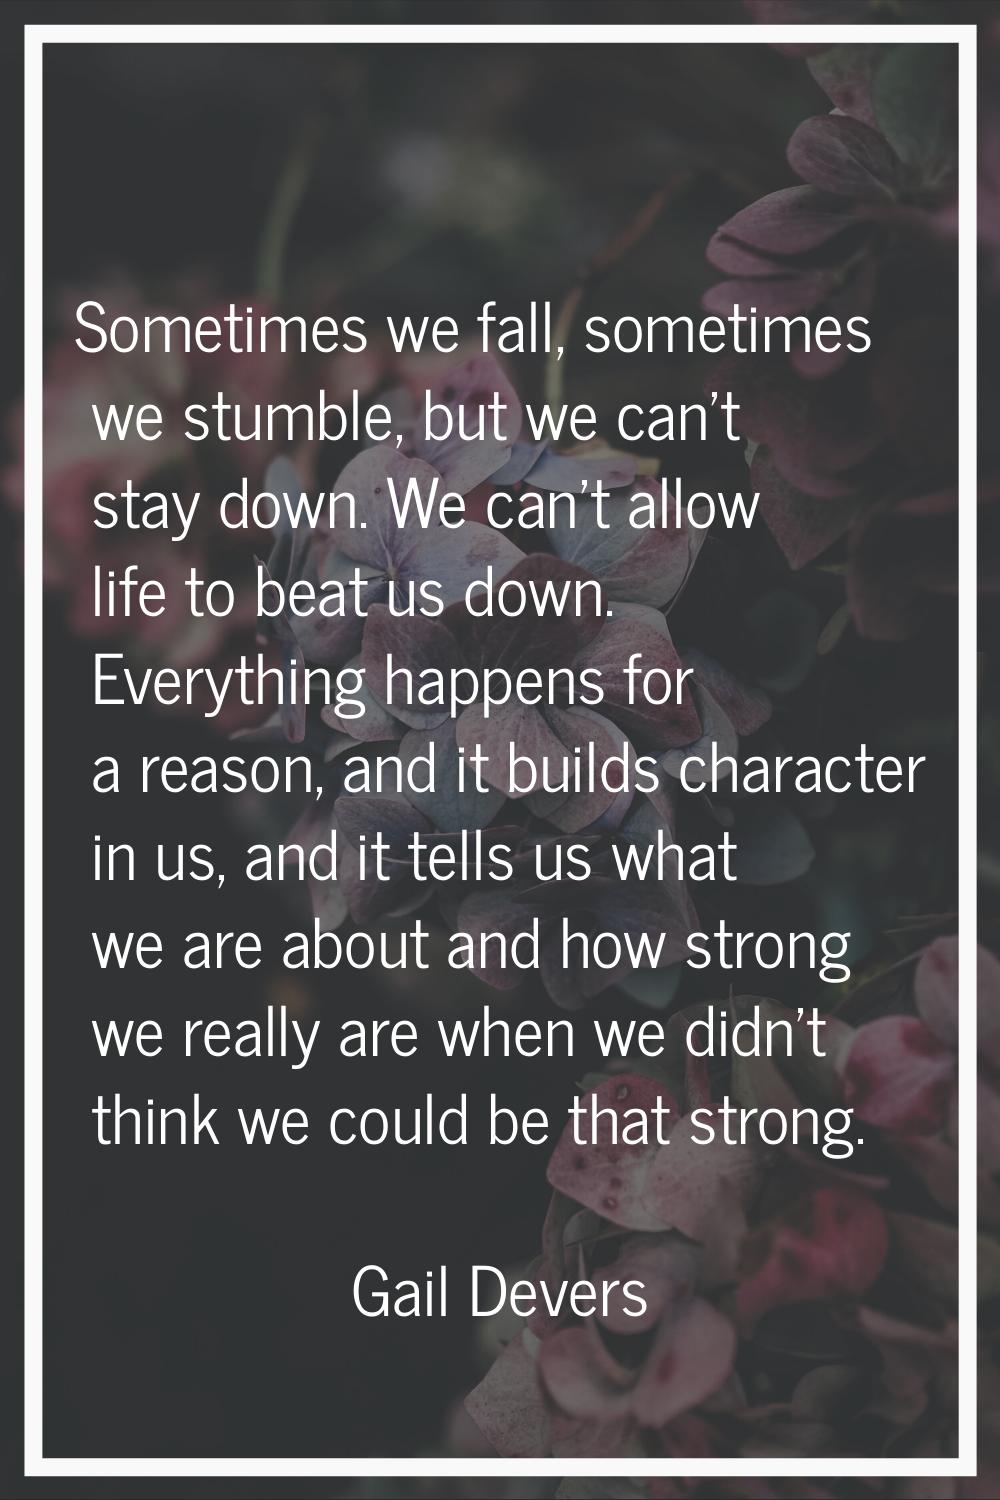 Sometimes we fall, sometimes we stumble, but we can't stay down. We can't allow life to beat us dow